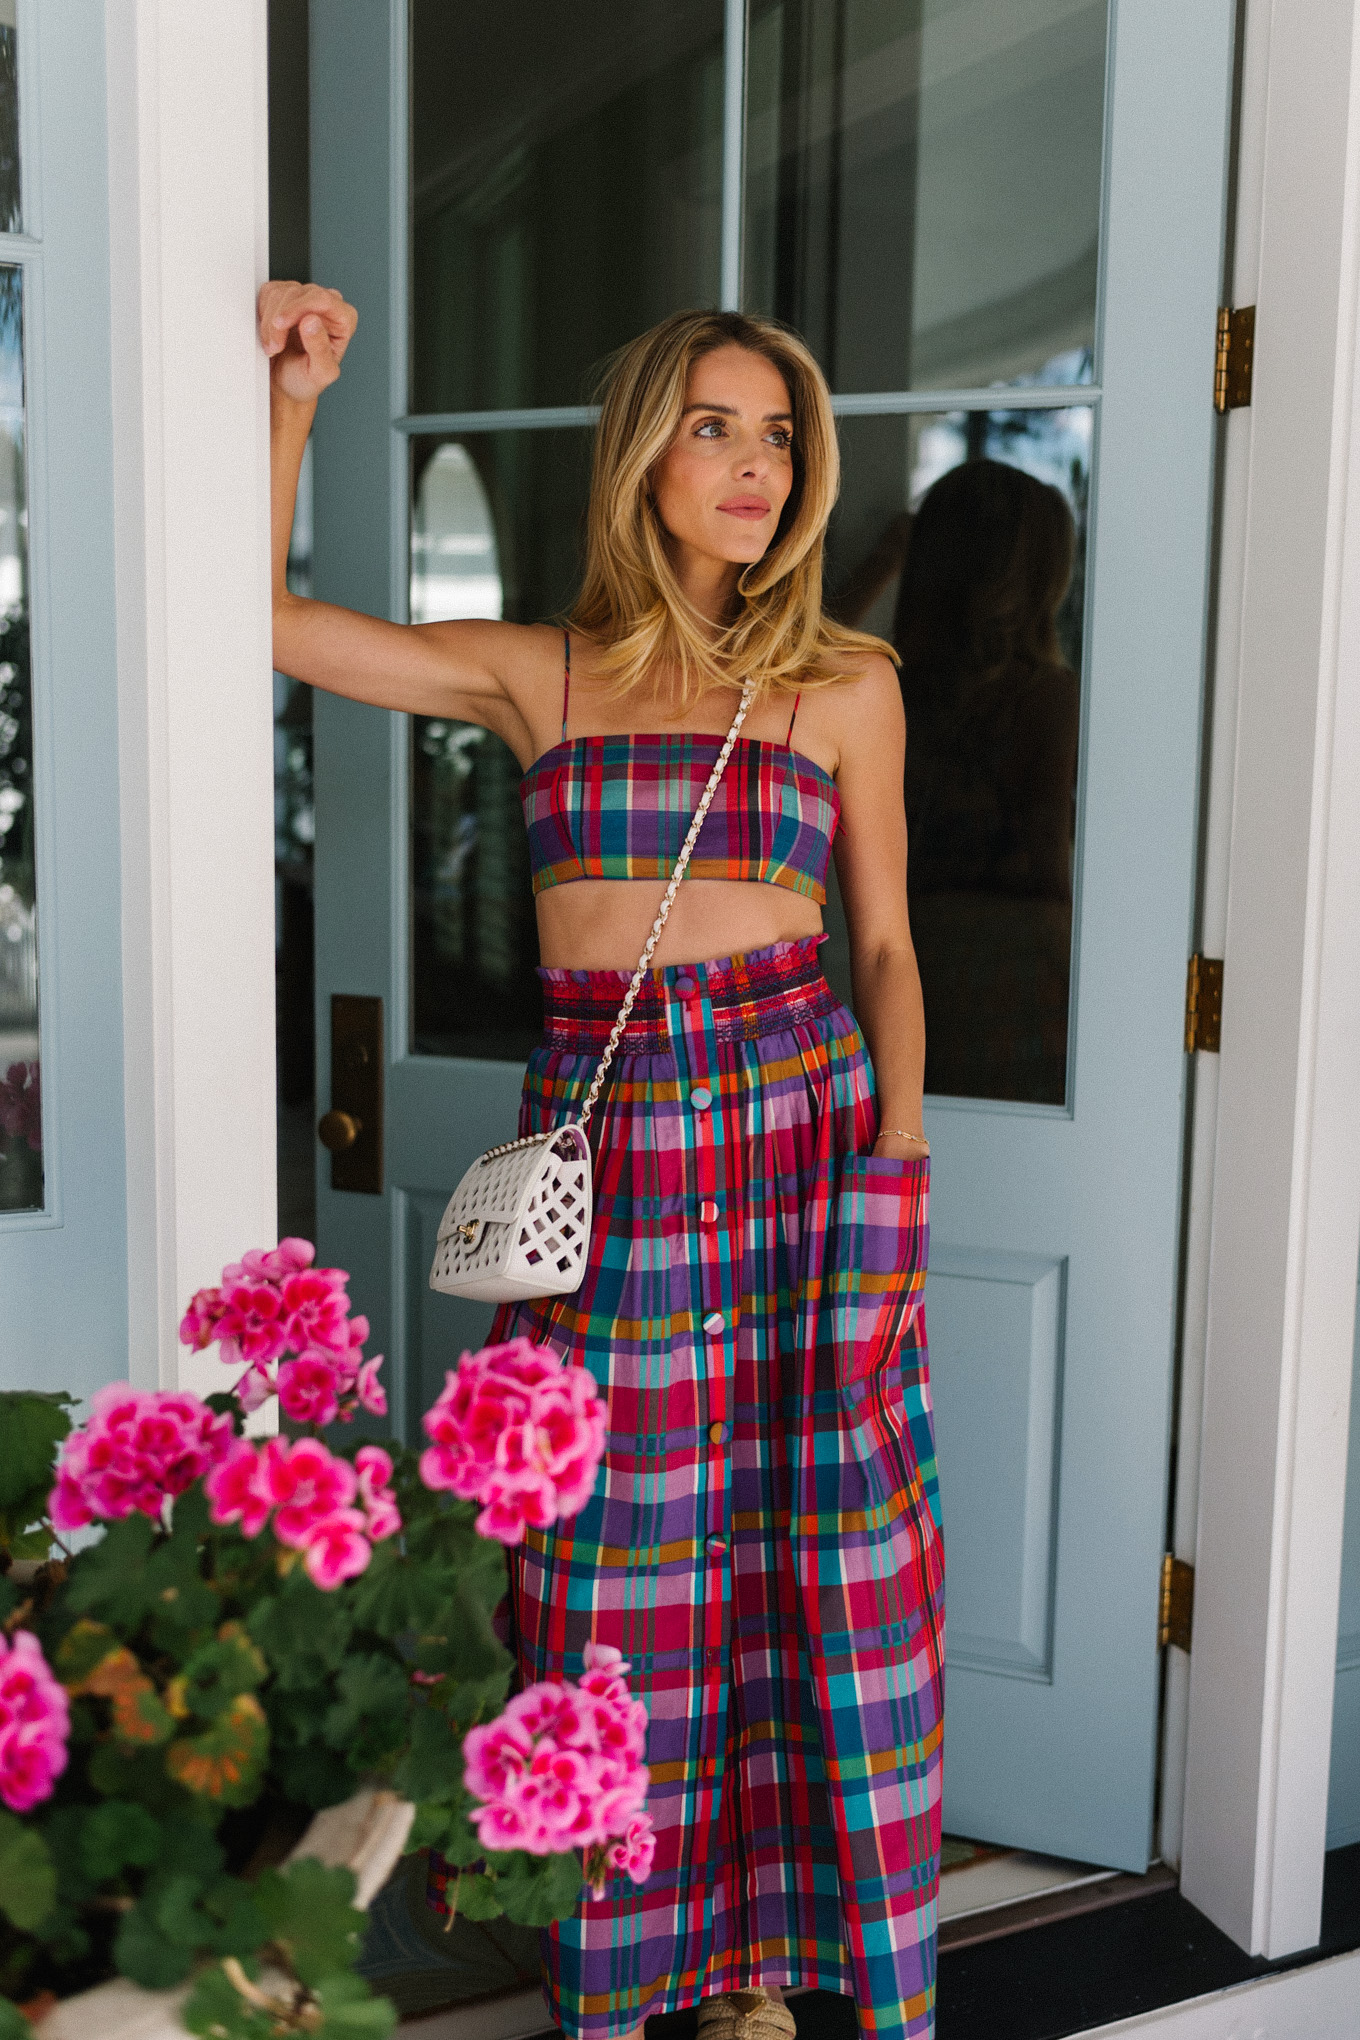 pink madras skirt and crop top set white woven bag